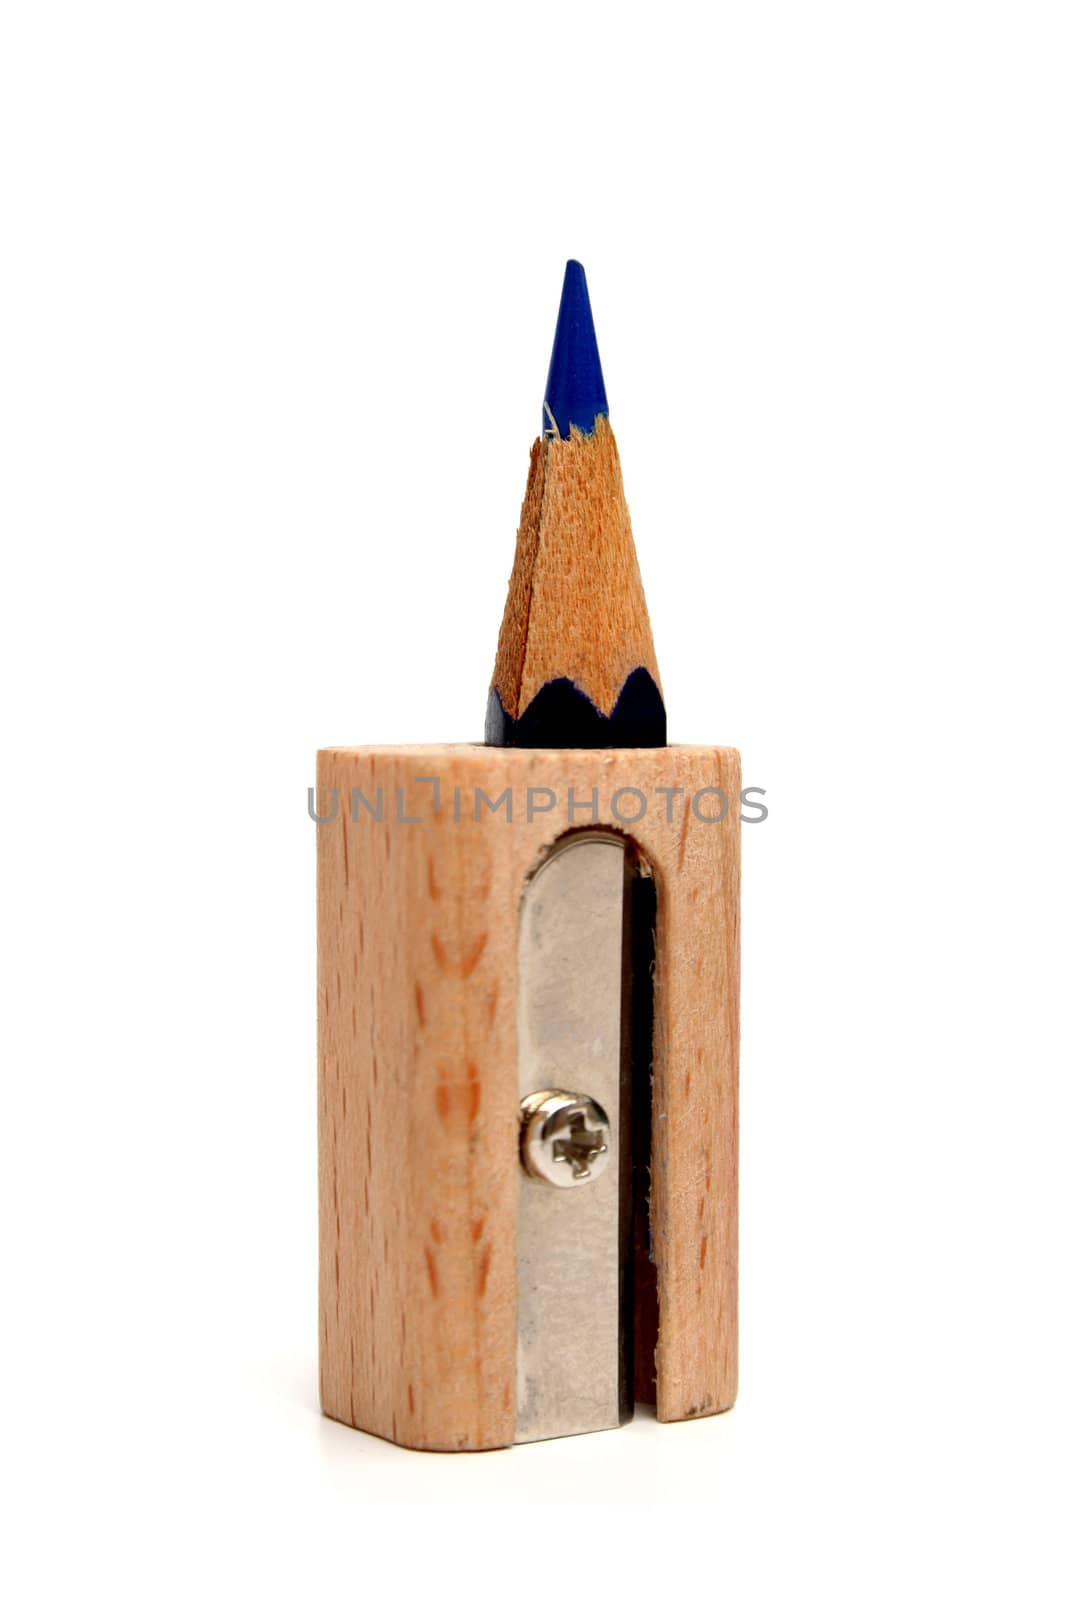 The rests of a pencil inside of a sharpener for pencils which stands vertically